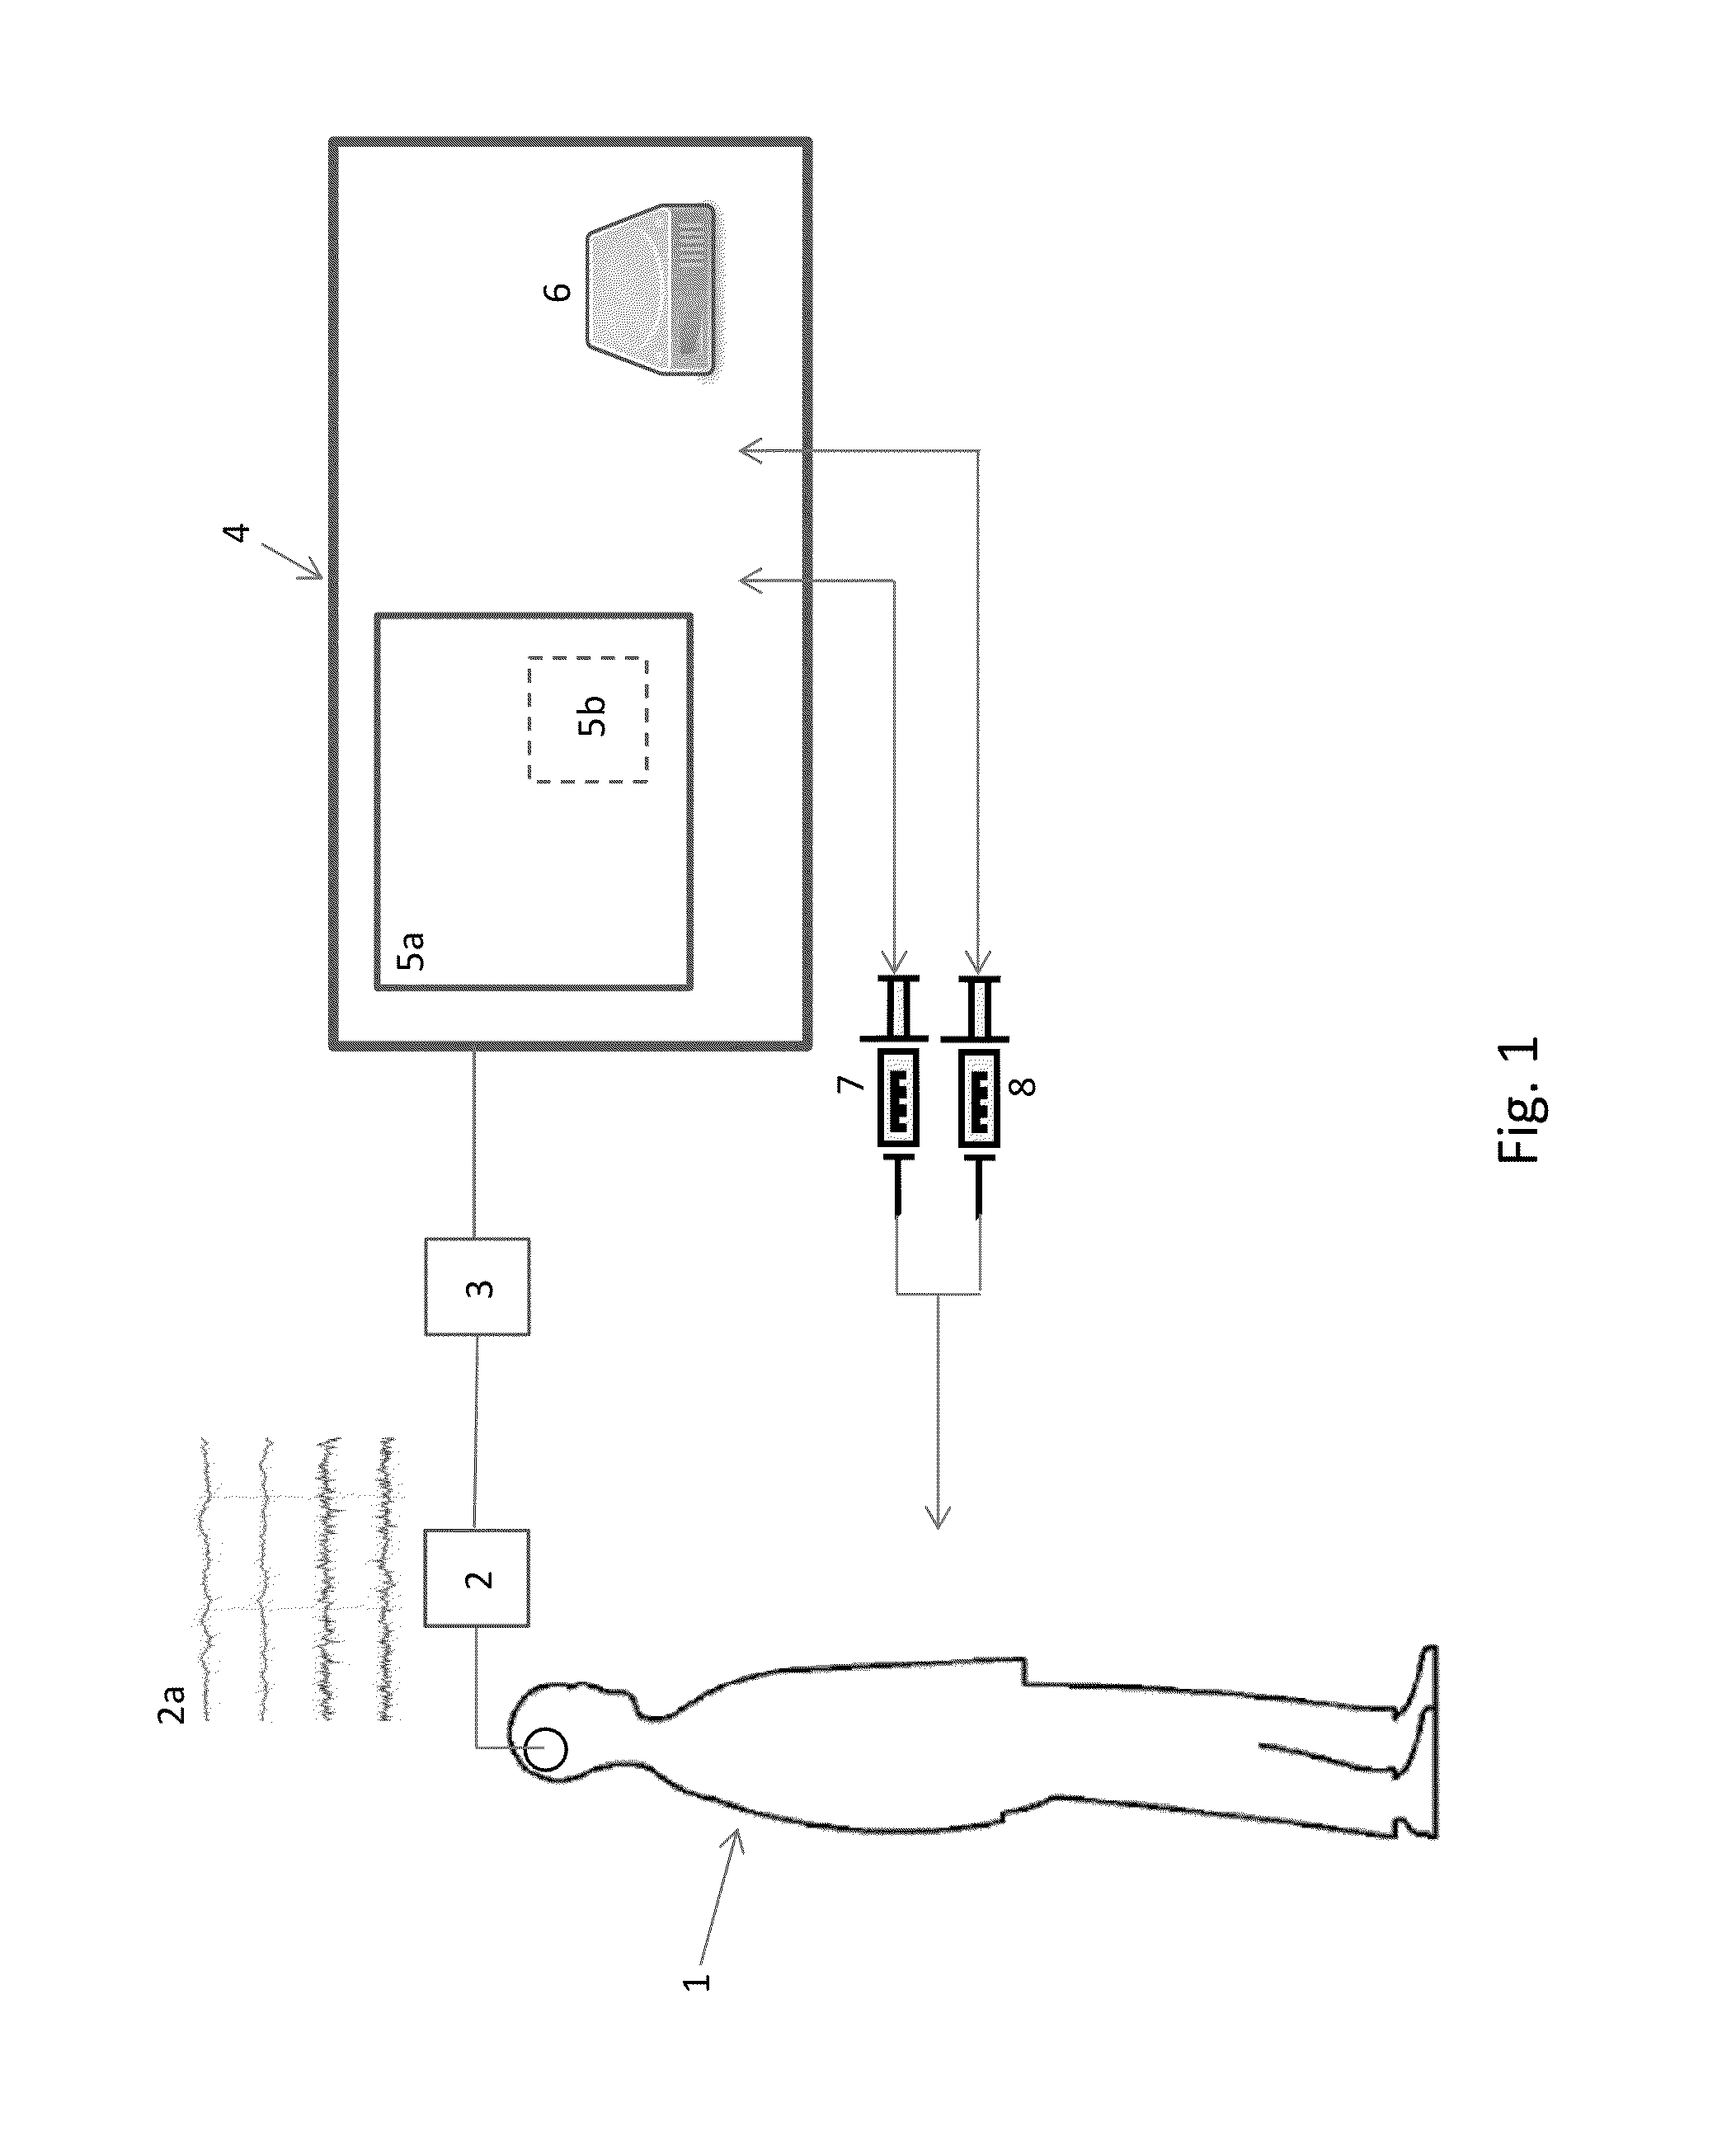 System for controlling means for injection of anesthetics or sedatives